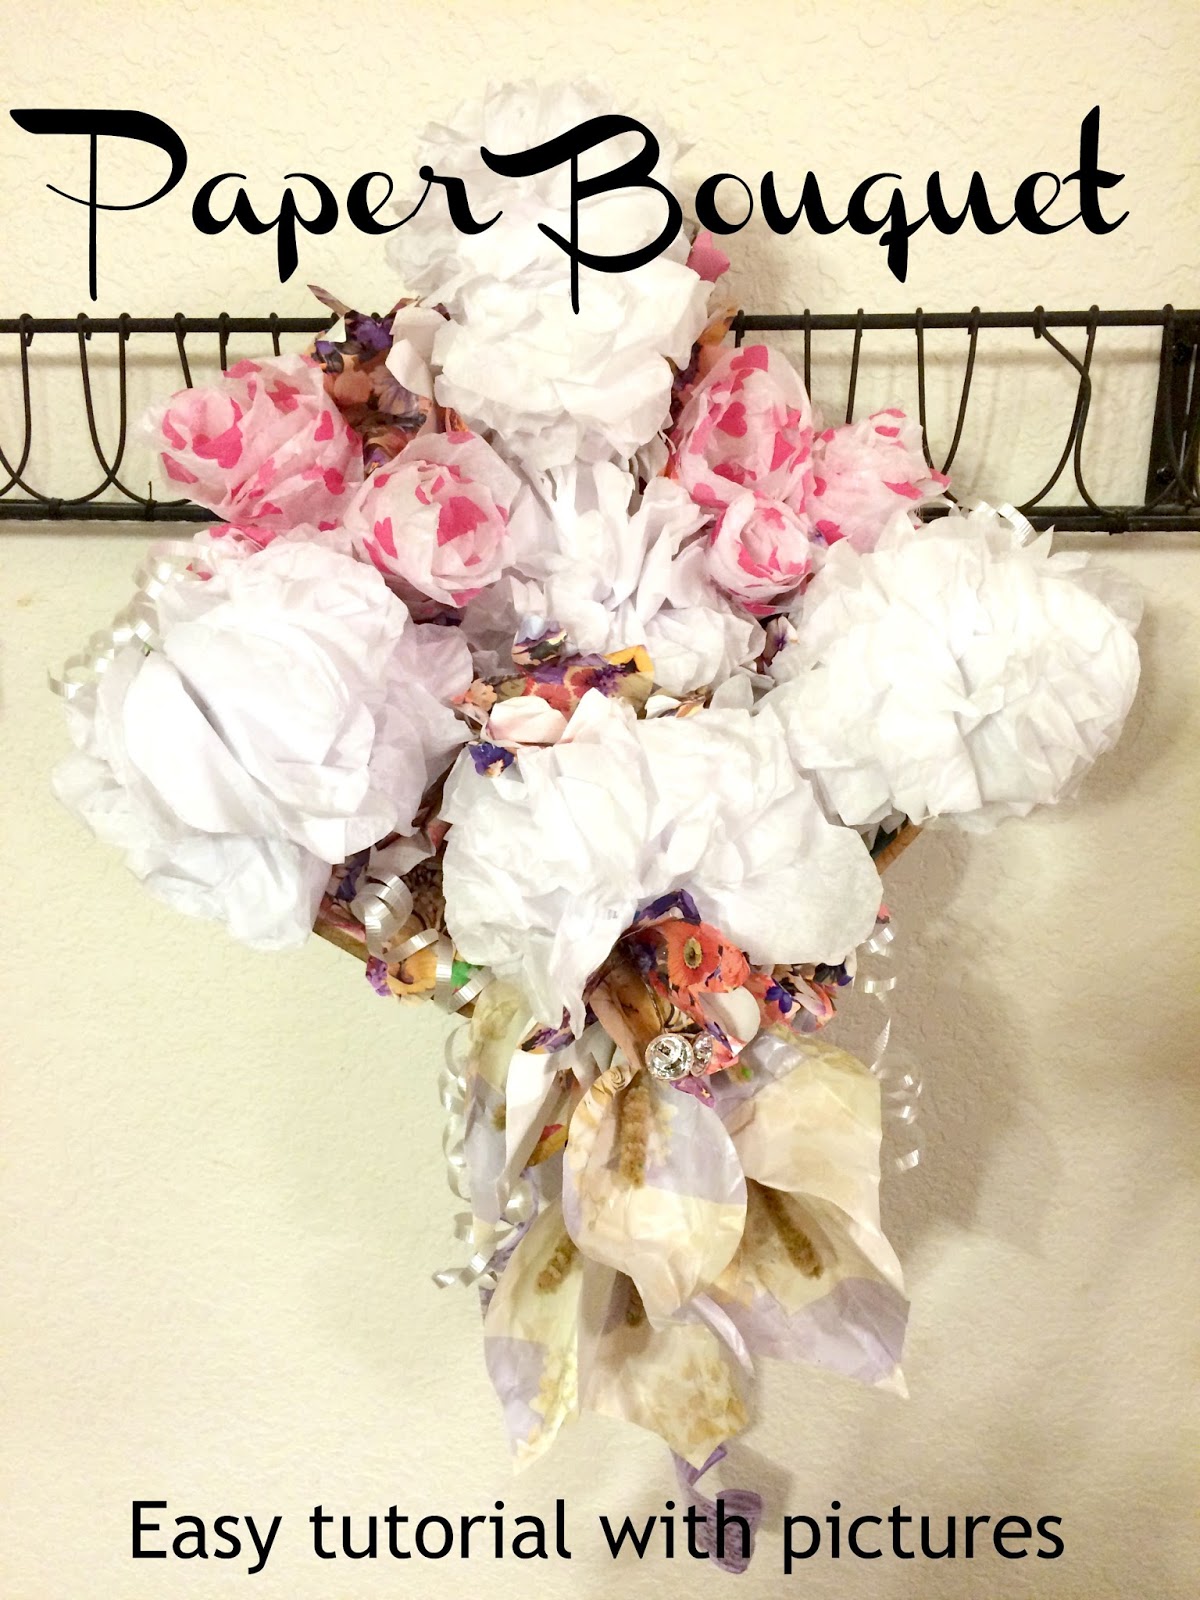 Paper Bouquet #DIY Tutorial with Pictures - We Got The Funk